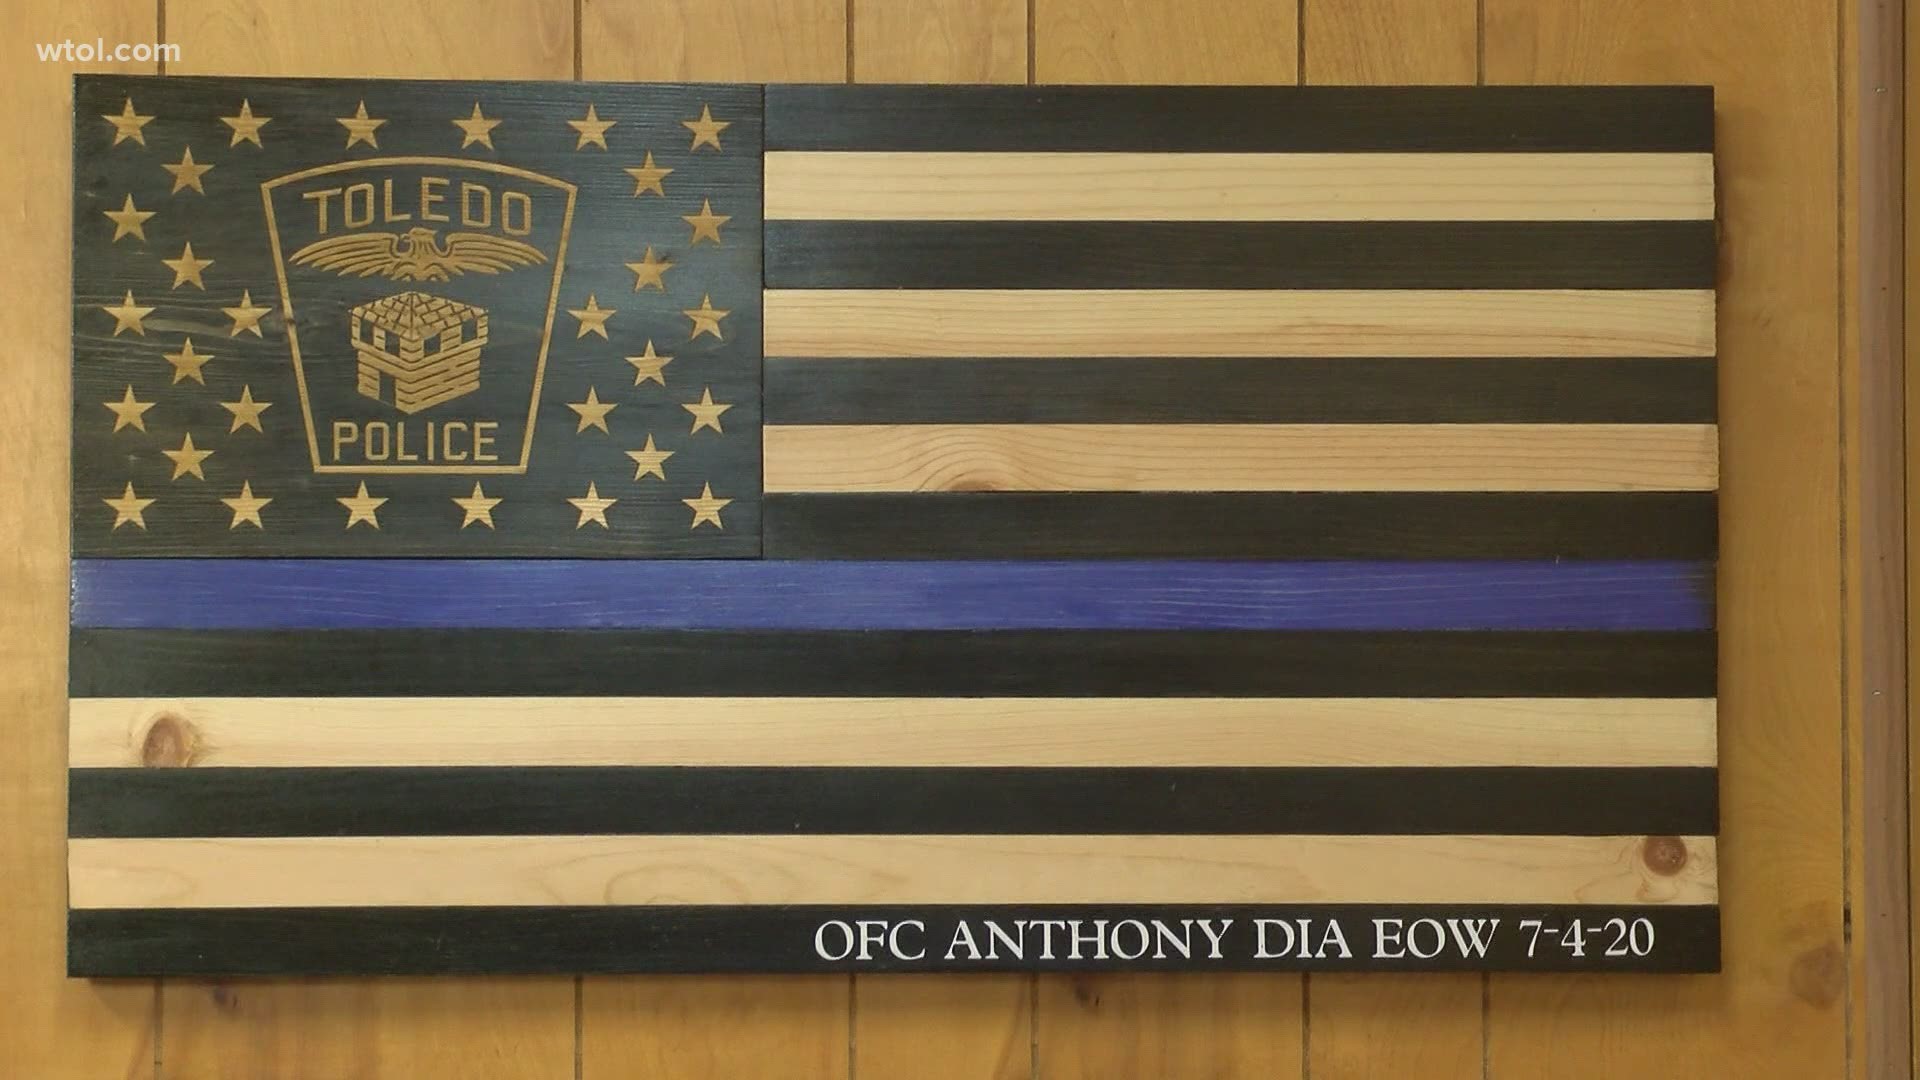 Just over 6 months ago, Officer Anthony Dia was shot and killed in the line of duty. On Monday, the department lost another officer, again gone too soon.